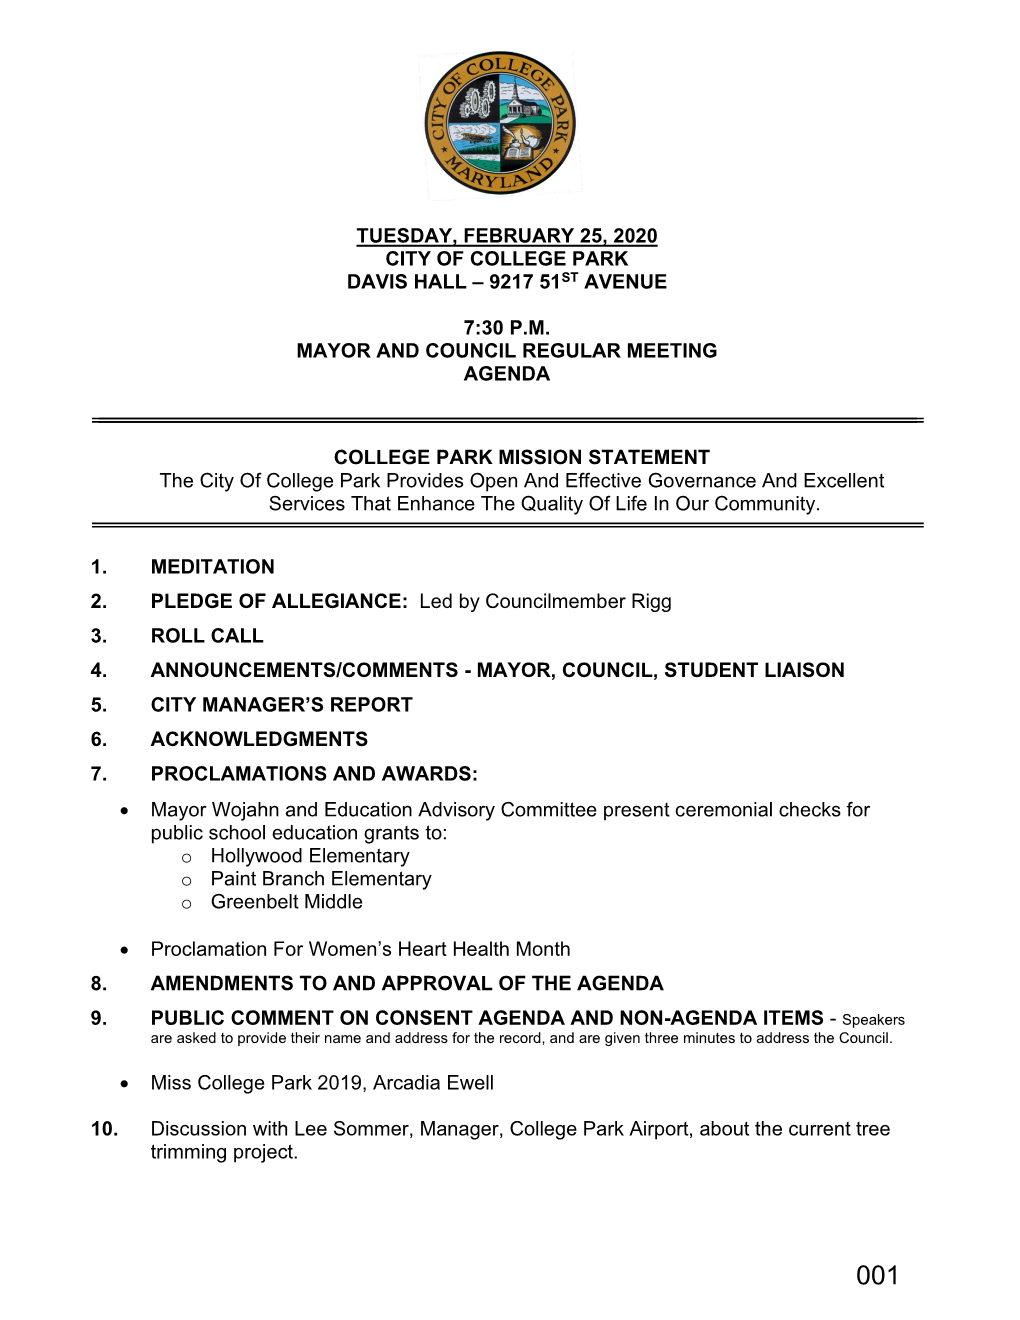 Tuesday, February 25, 2020 City of College Park Davis Hall – 9217 51St Avenue 7:30 P.M. Mayor and Council Regular Meeting Agen